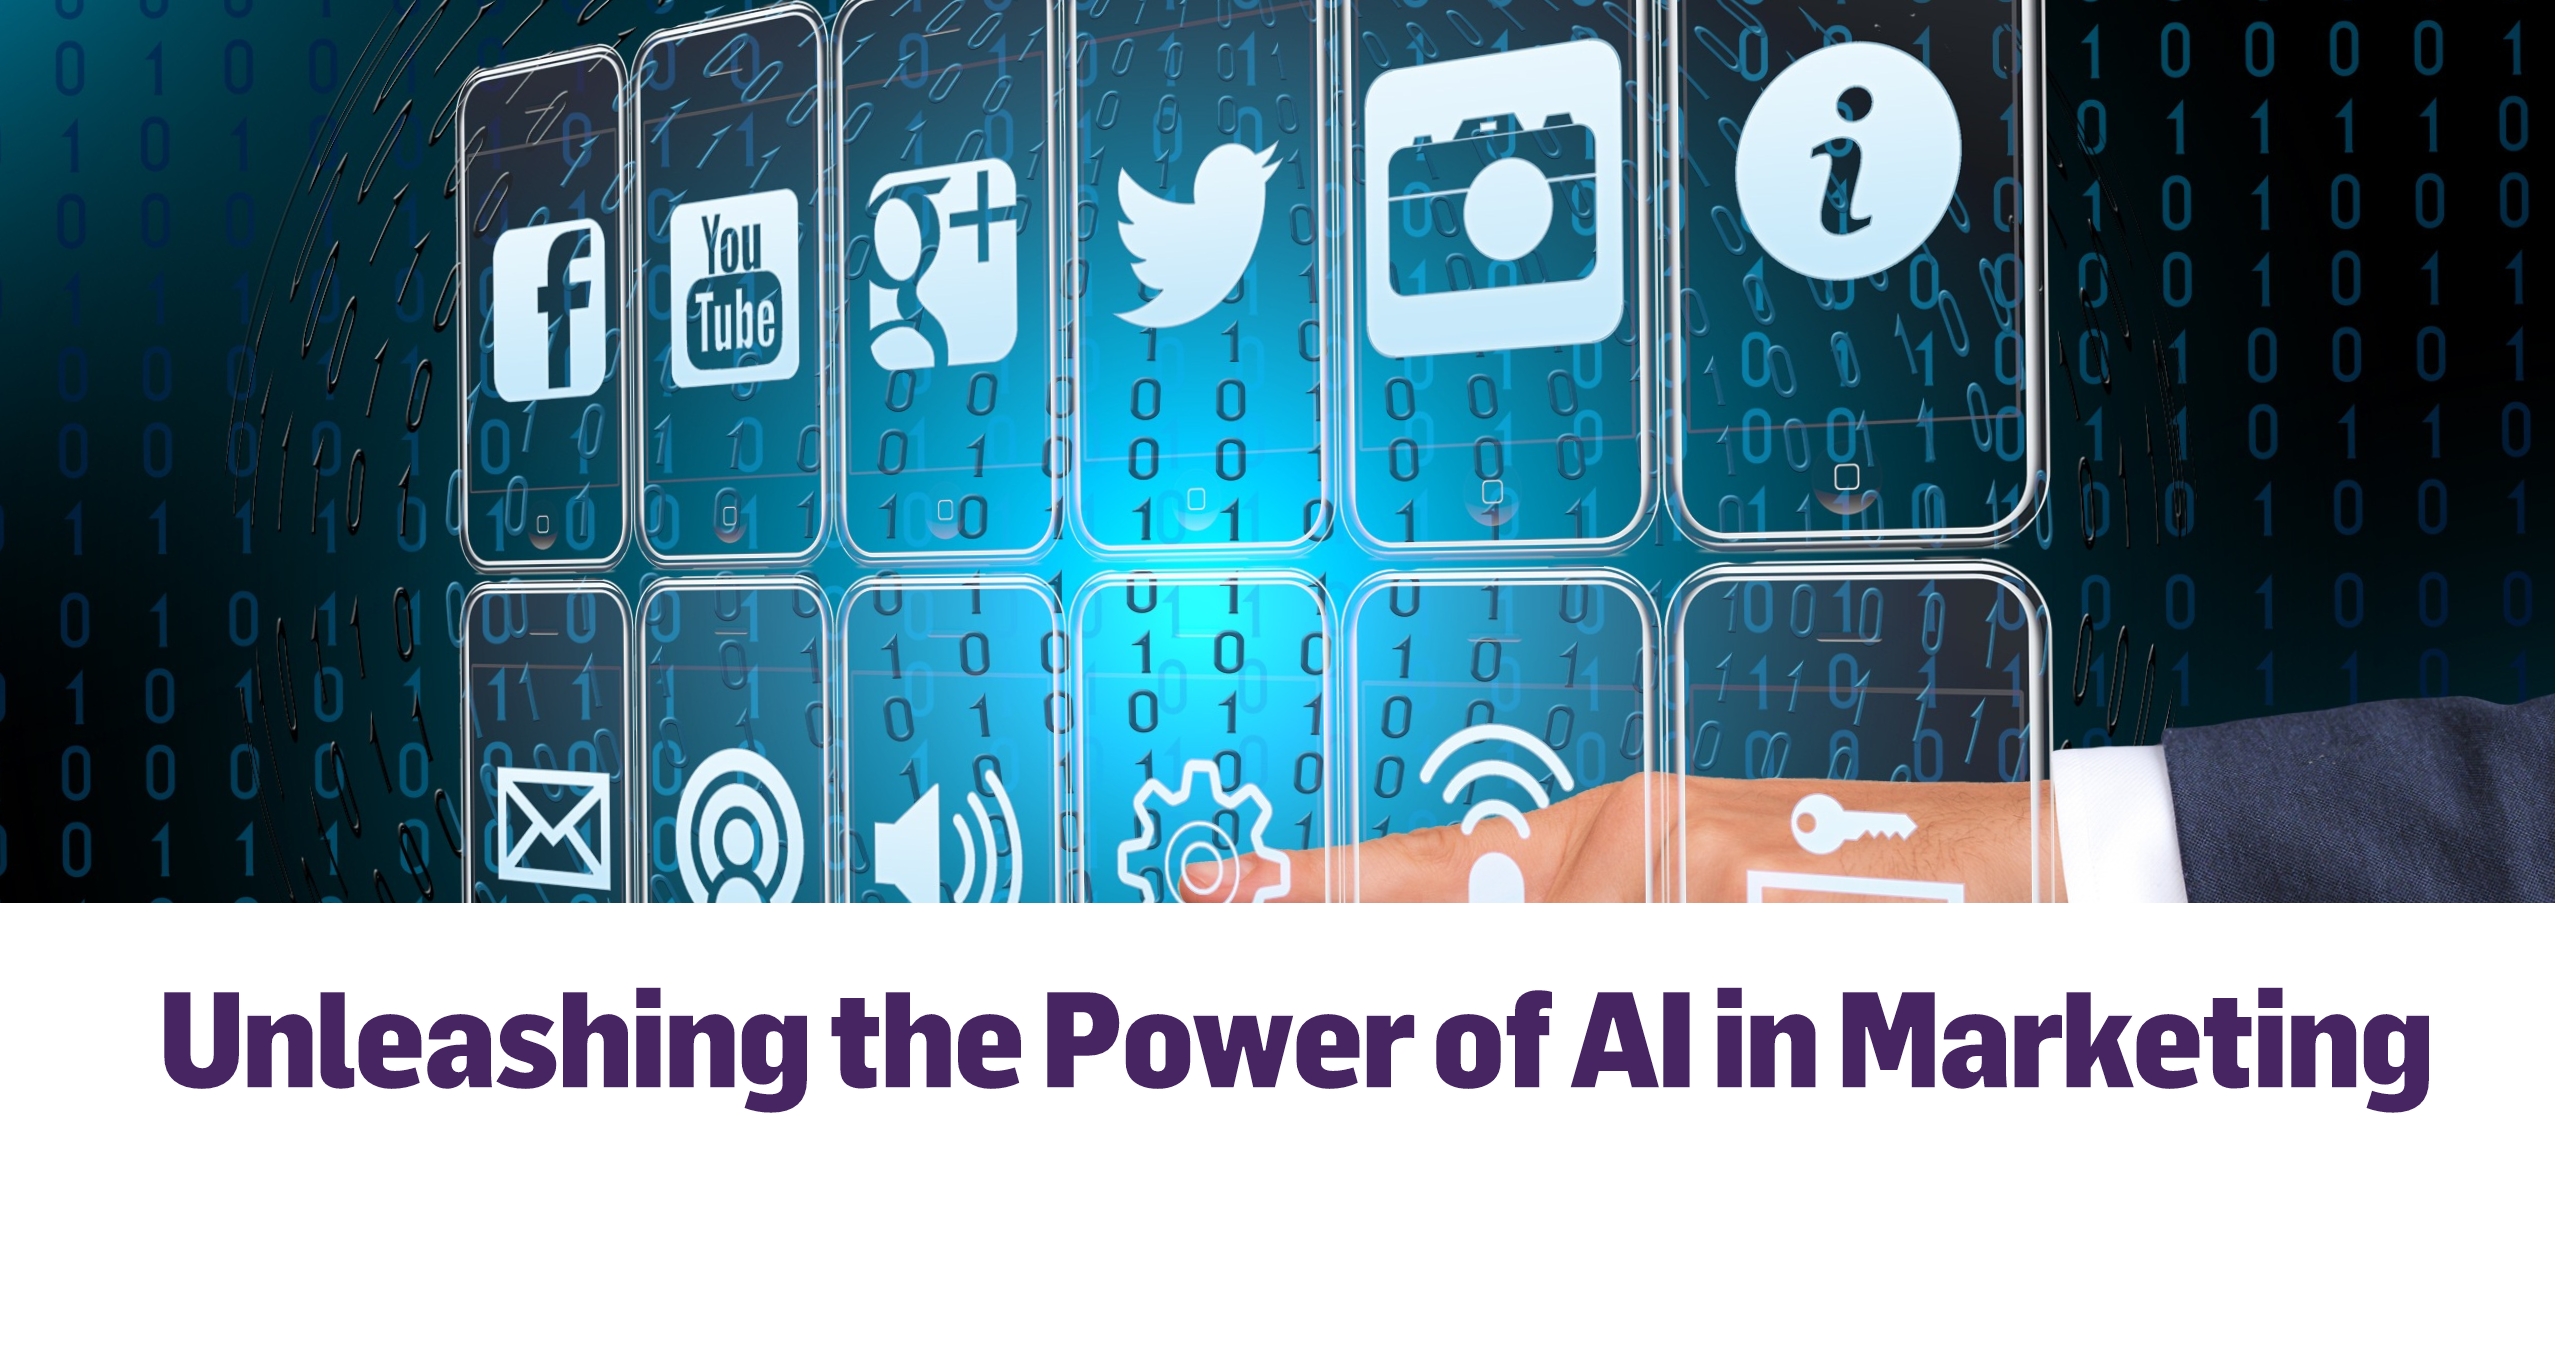 Unleashing the Power of AI in Marketing